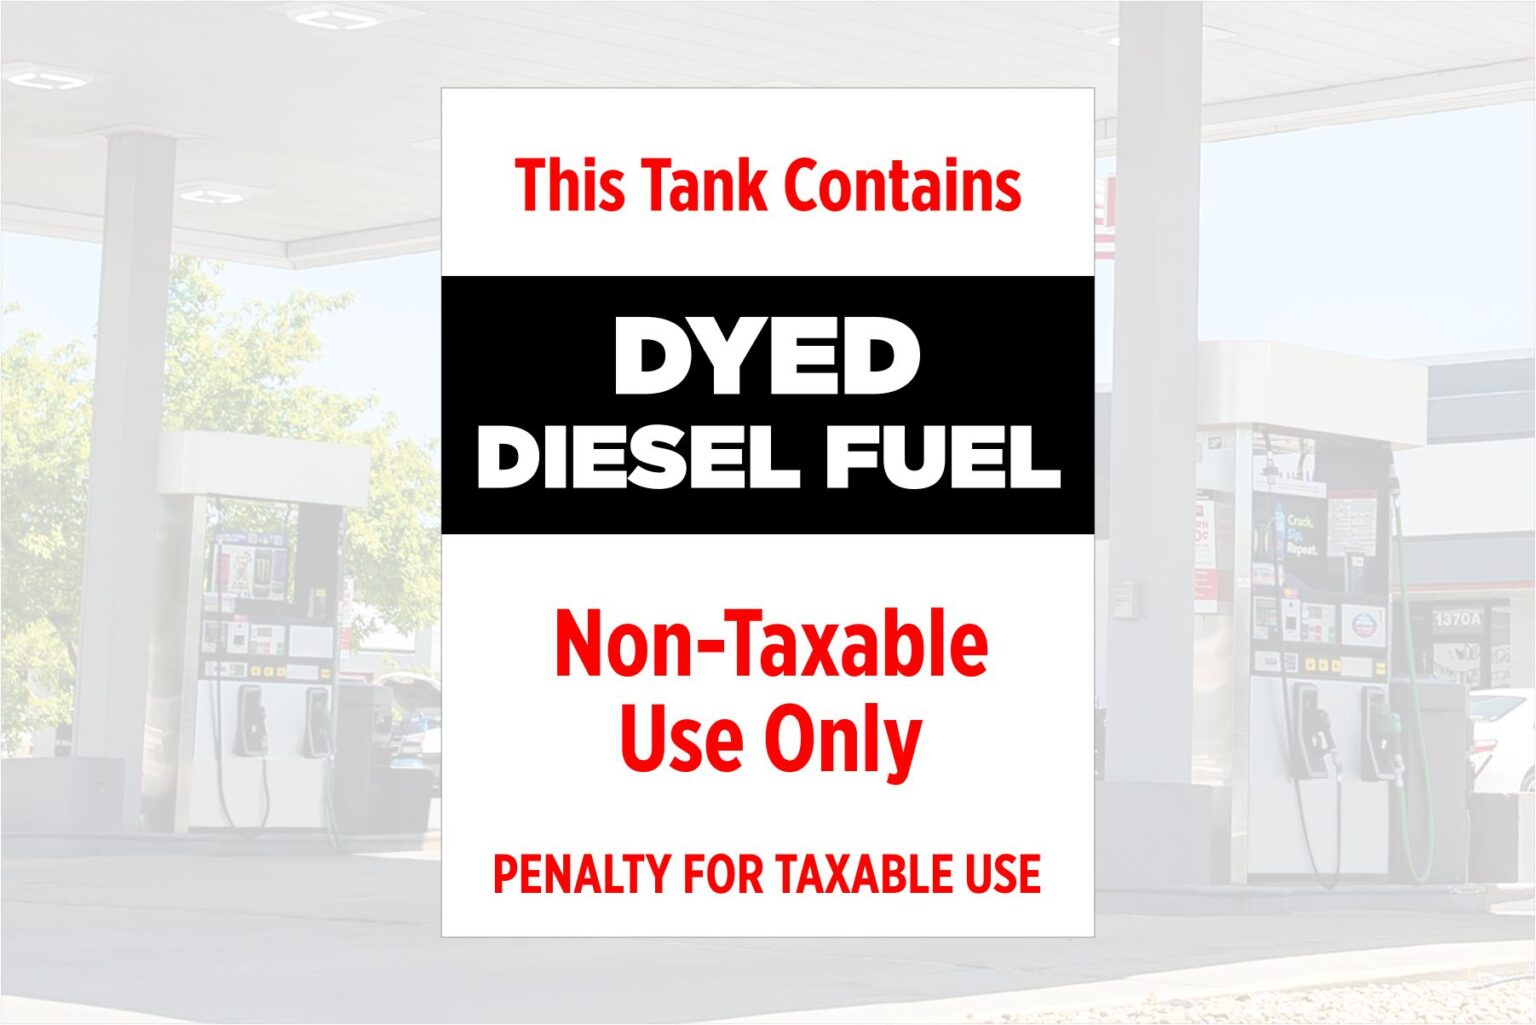 this-tank-contains-dyed-diesel-fuel-non-taxable-use-only-penalty-for